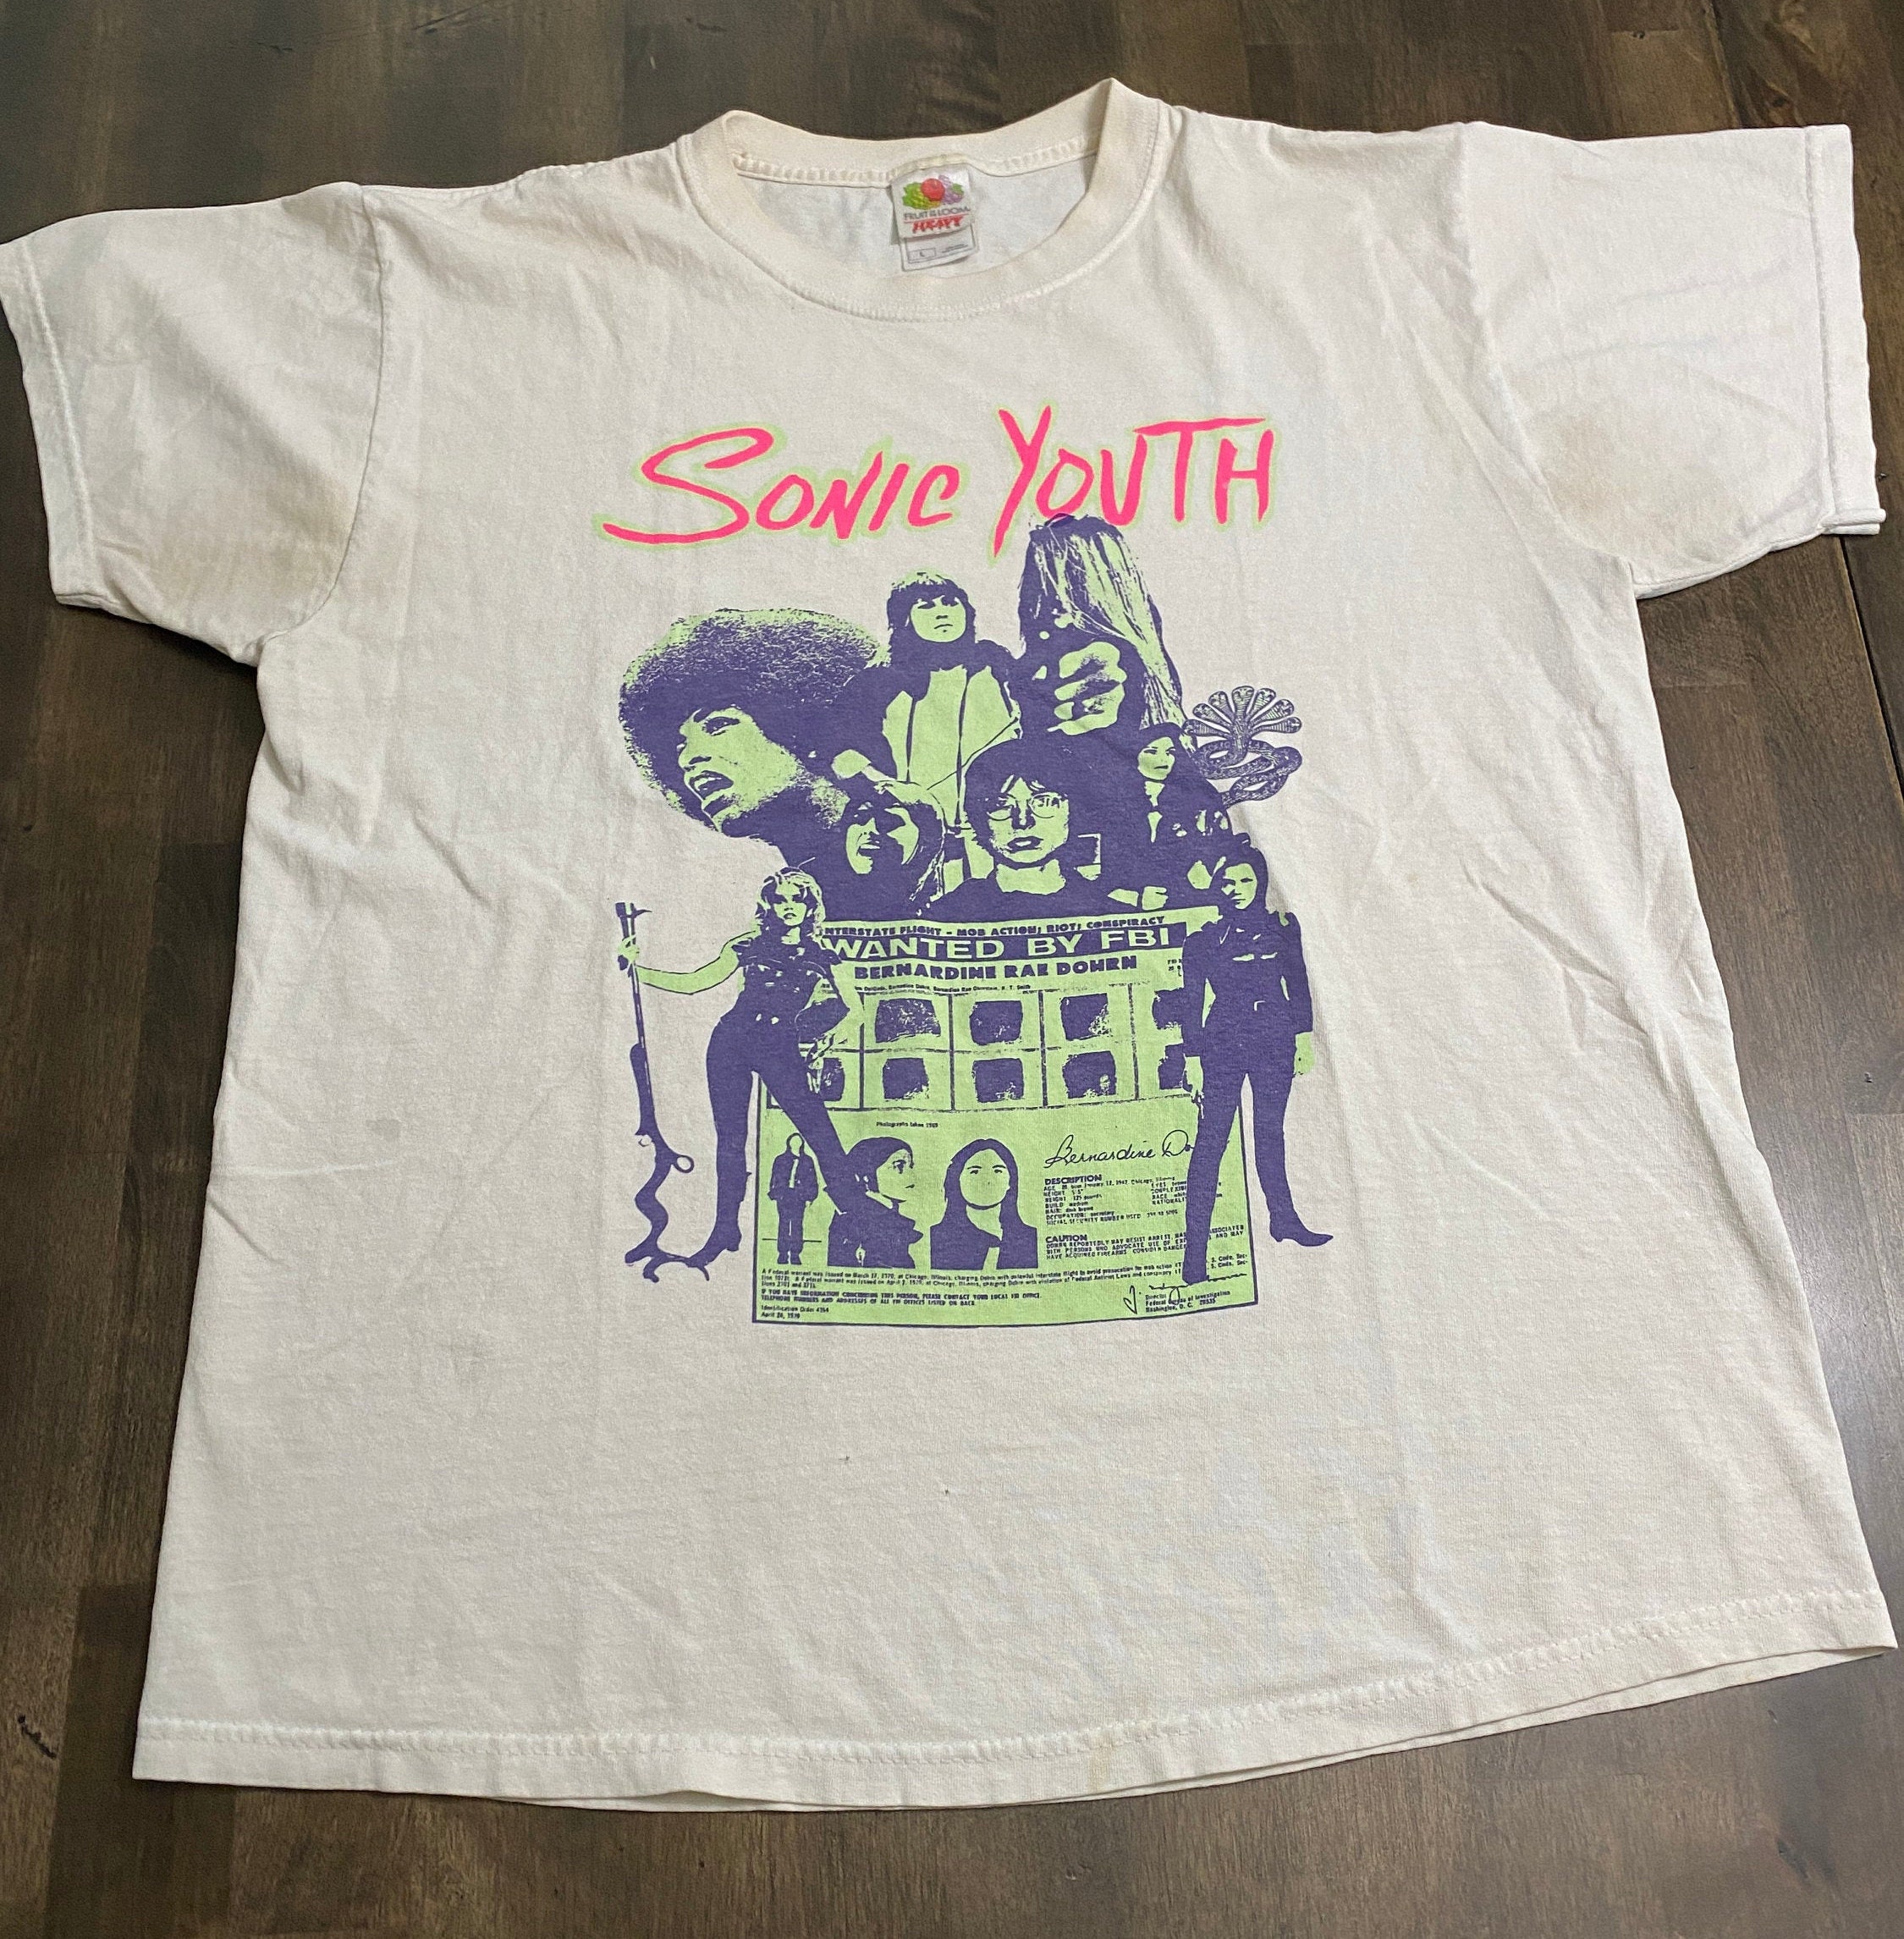 Vintage 90s Sonic Youth T-shirt | Etsy